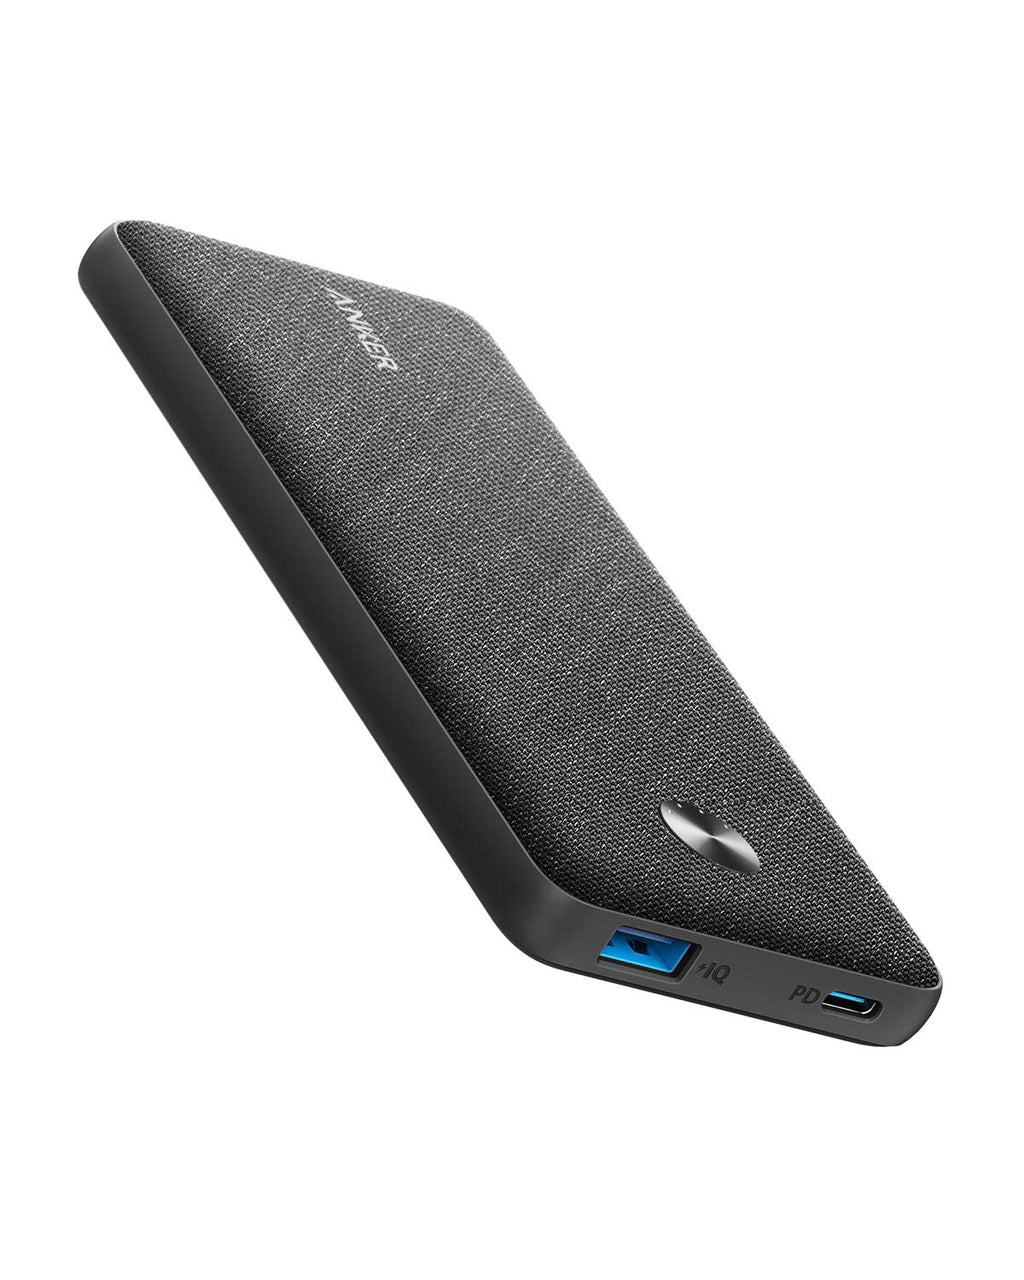 [Australia - AusPower] - Anker PowerCore Metro Slim 10000 PD, 10000mAh Portable Charger USB-C Power Delivery (18W) Power Bank for iPhone 11/11 Pro / 11 Pro Max / 8 / X/XS/XR, S10, Pixel 3, iPad Pro 2018, and More black 